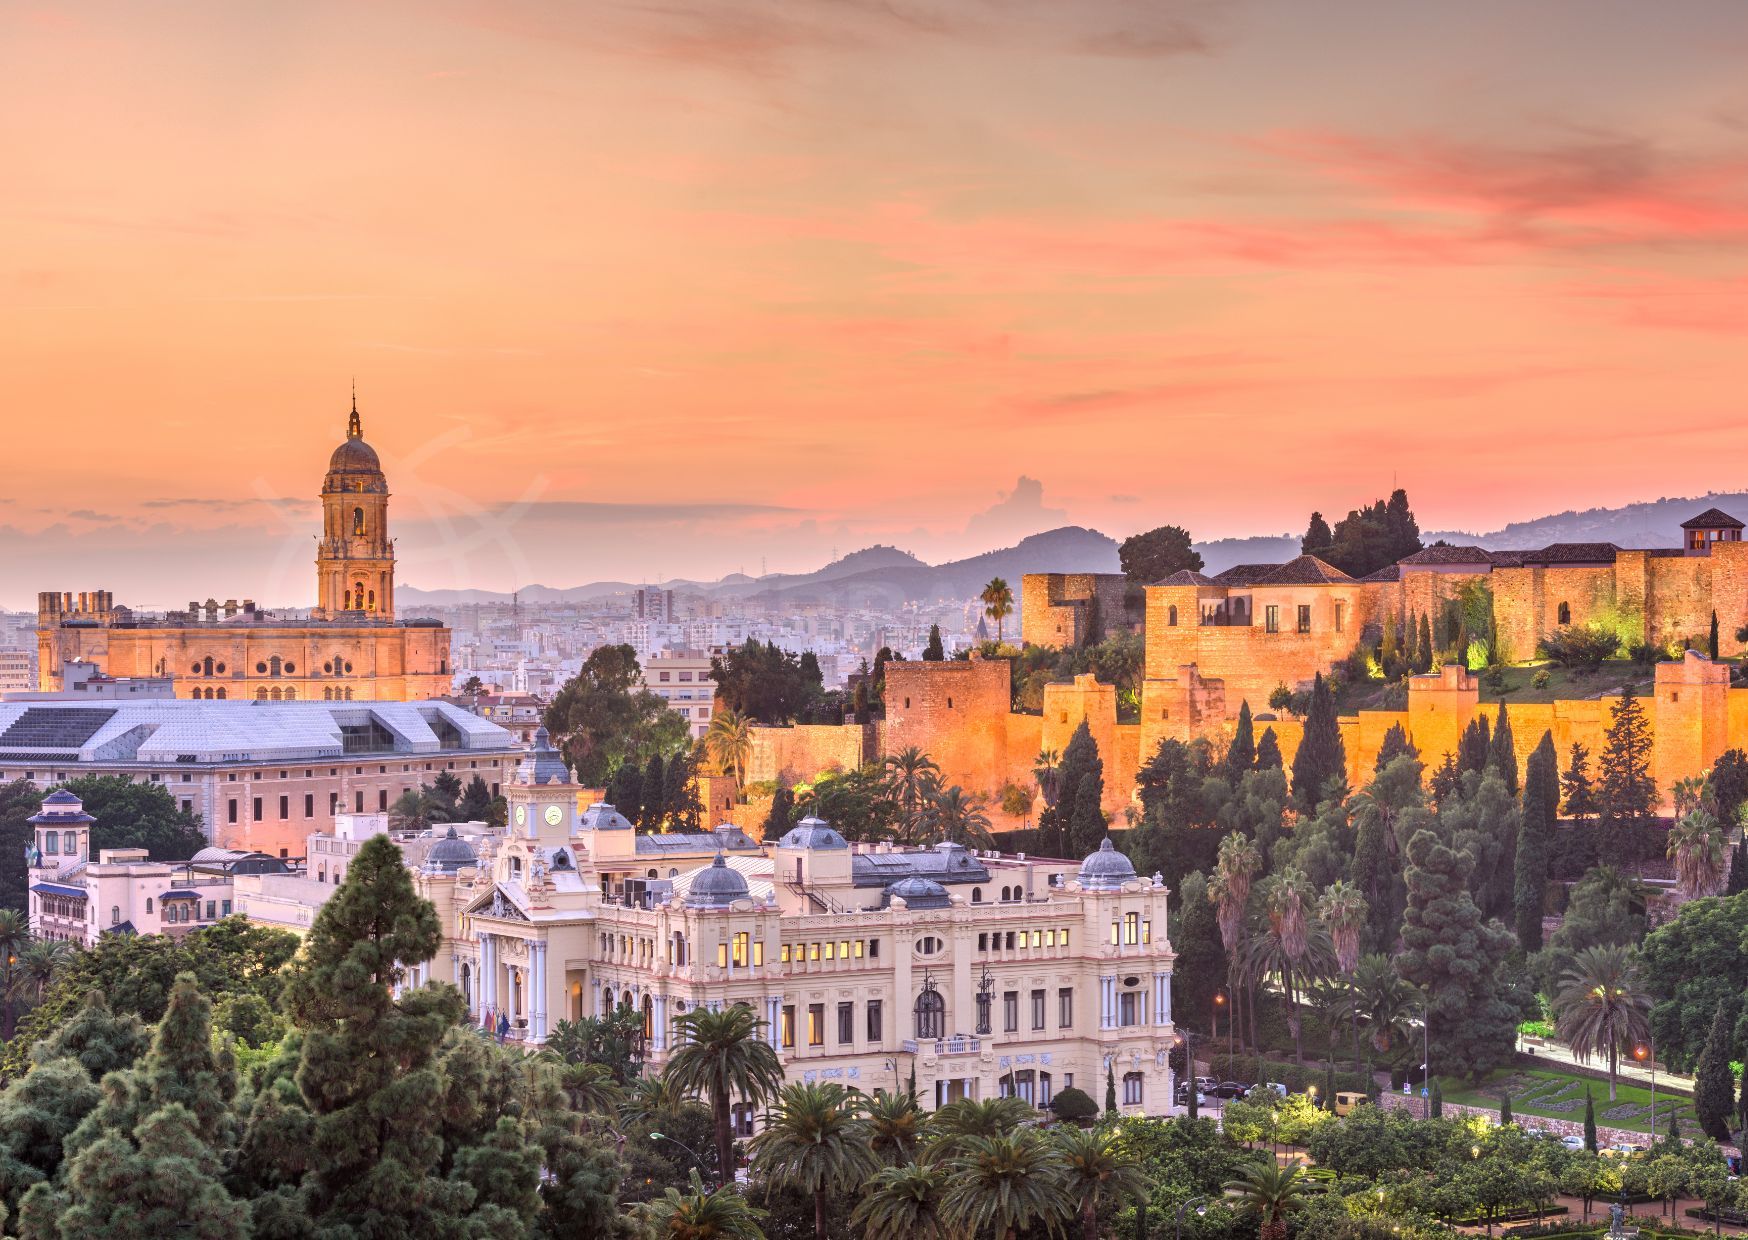 Malaga becomes Spain’s newest hotspot